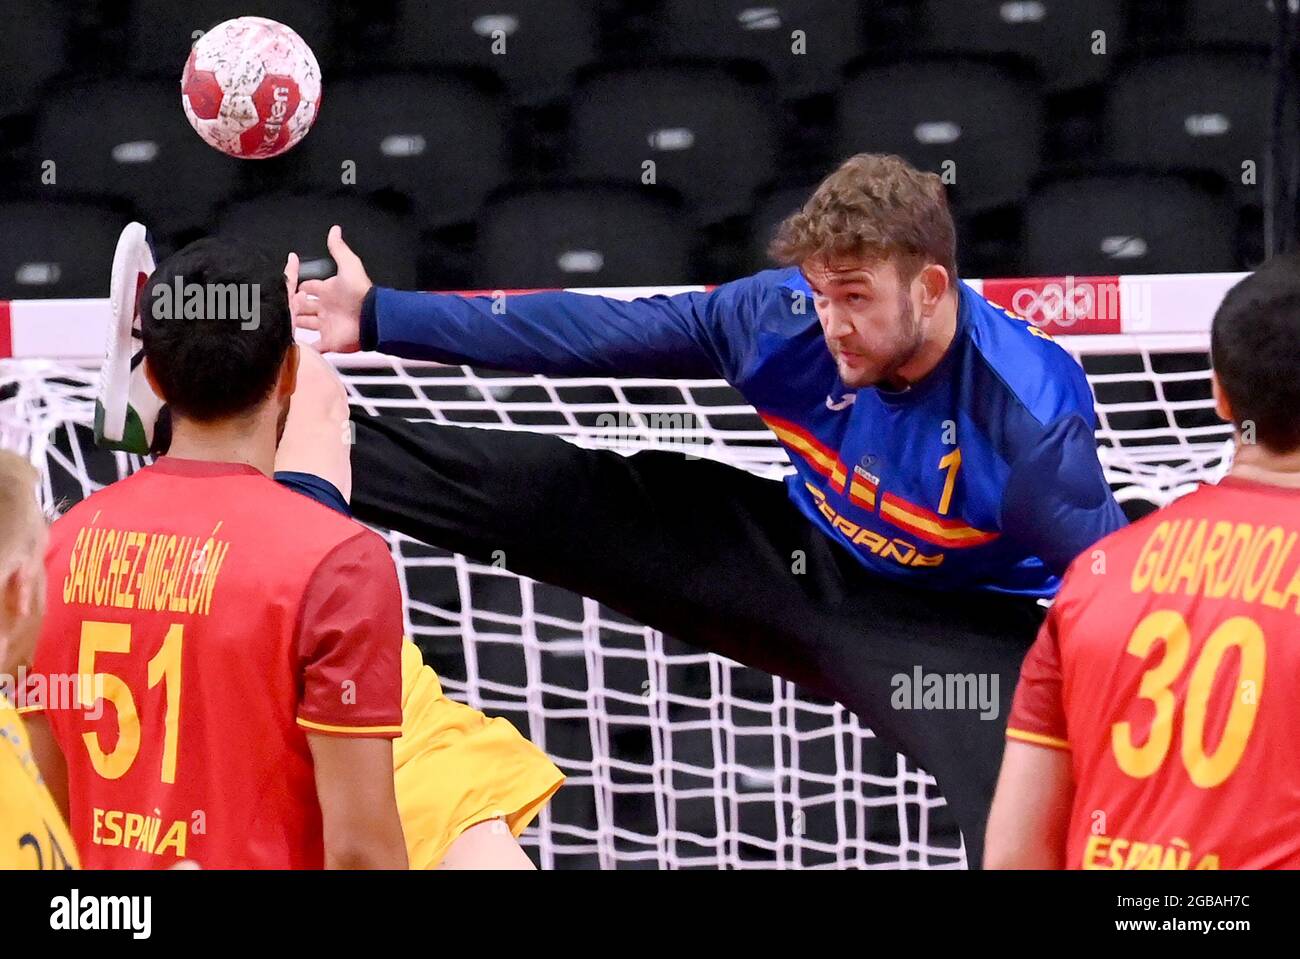 Tokyo, Japan. 3rd Aug, 2021. Goalkeeper Gonzalo Perez de Vargas Moreno (C) of Spain makes a save during the handball men's quarterfinal between Sweden and Spain at the Tokyo 2020 Olympic Games in Tokyo, Japan, Aug. 3, 2021. Credit: Guo Chen/Xinhua/Alamy Live News Stock Photo